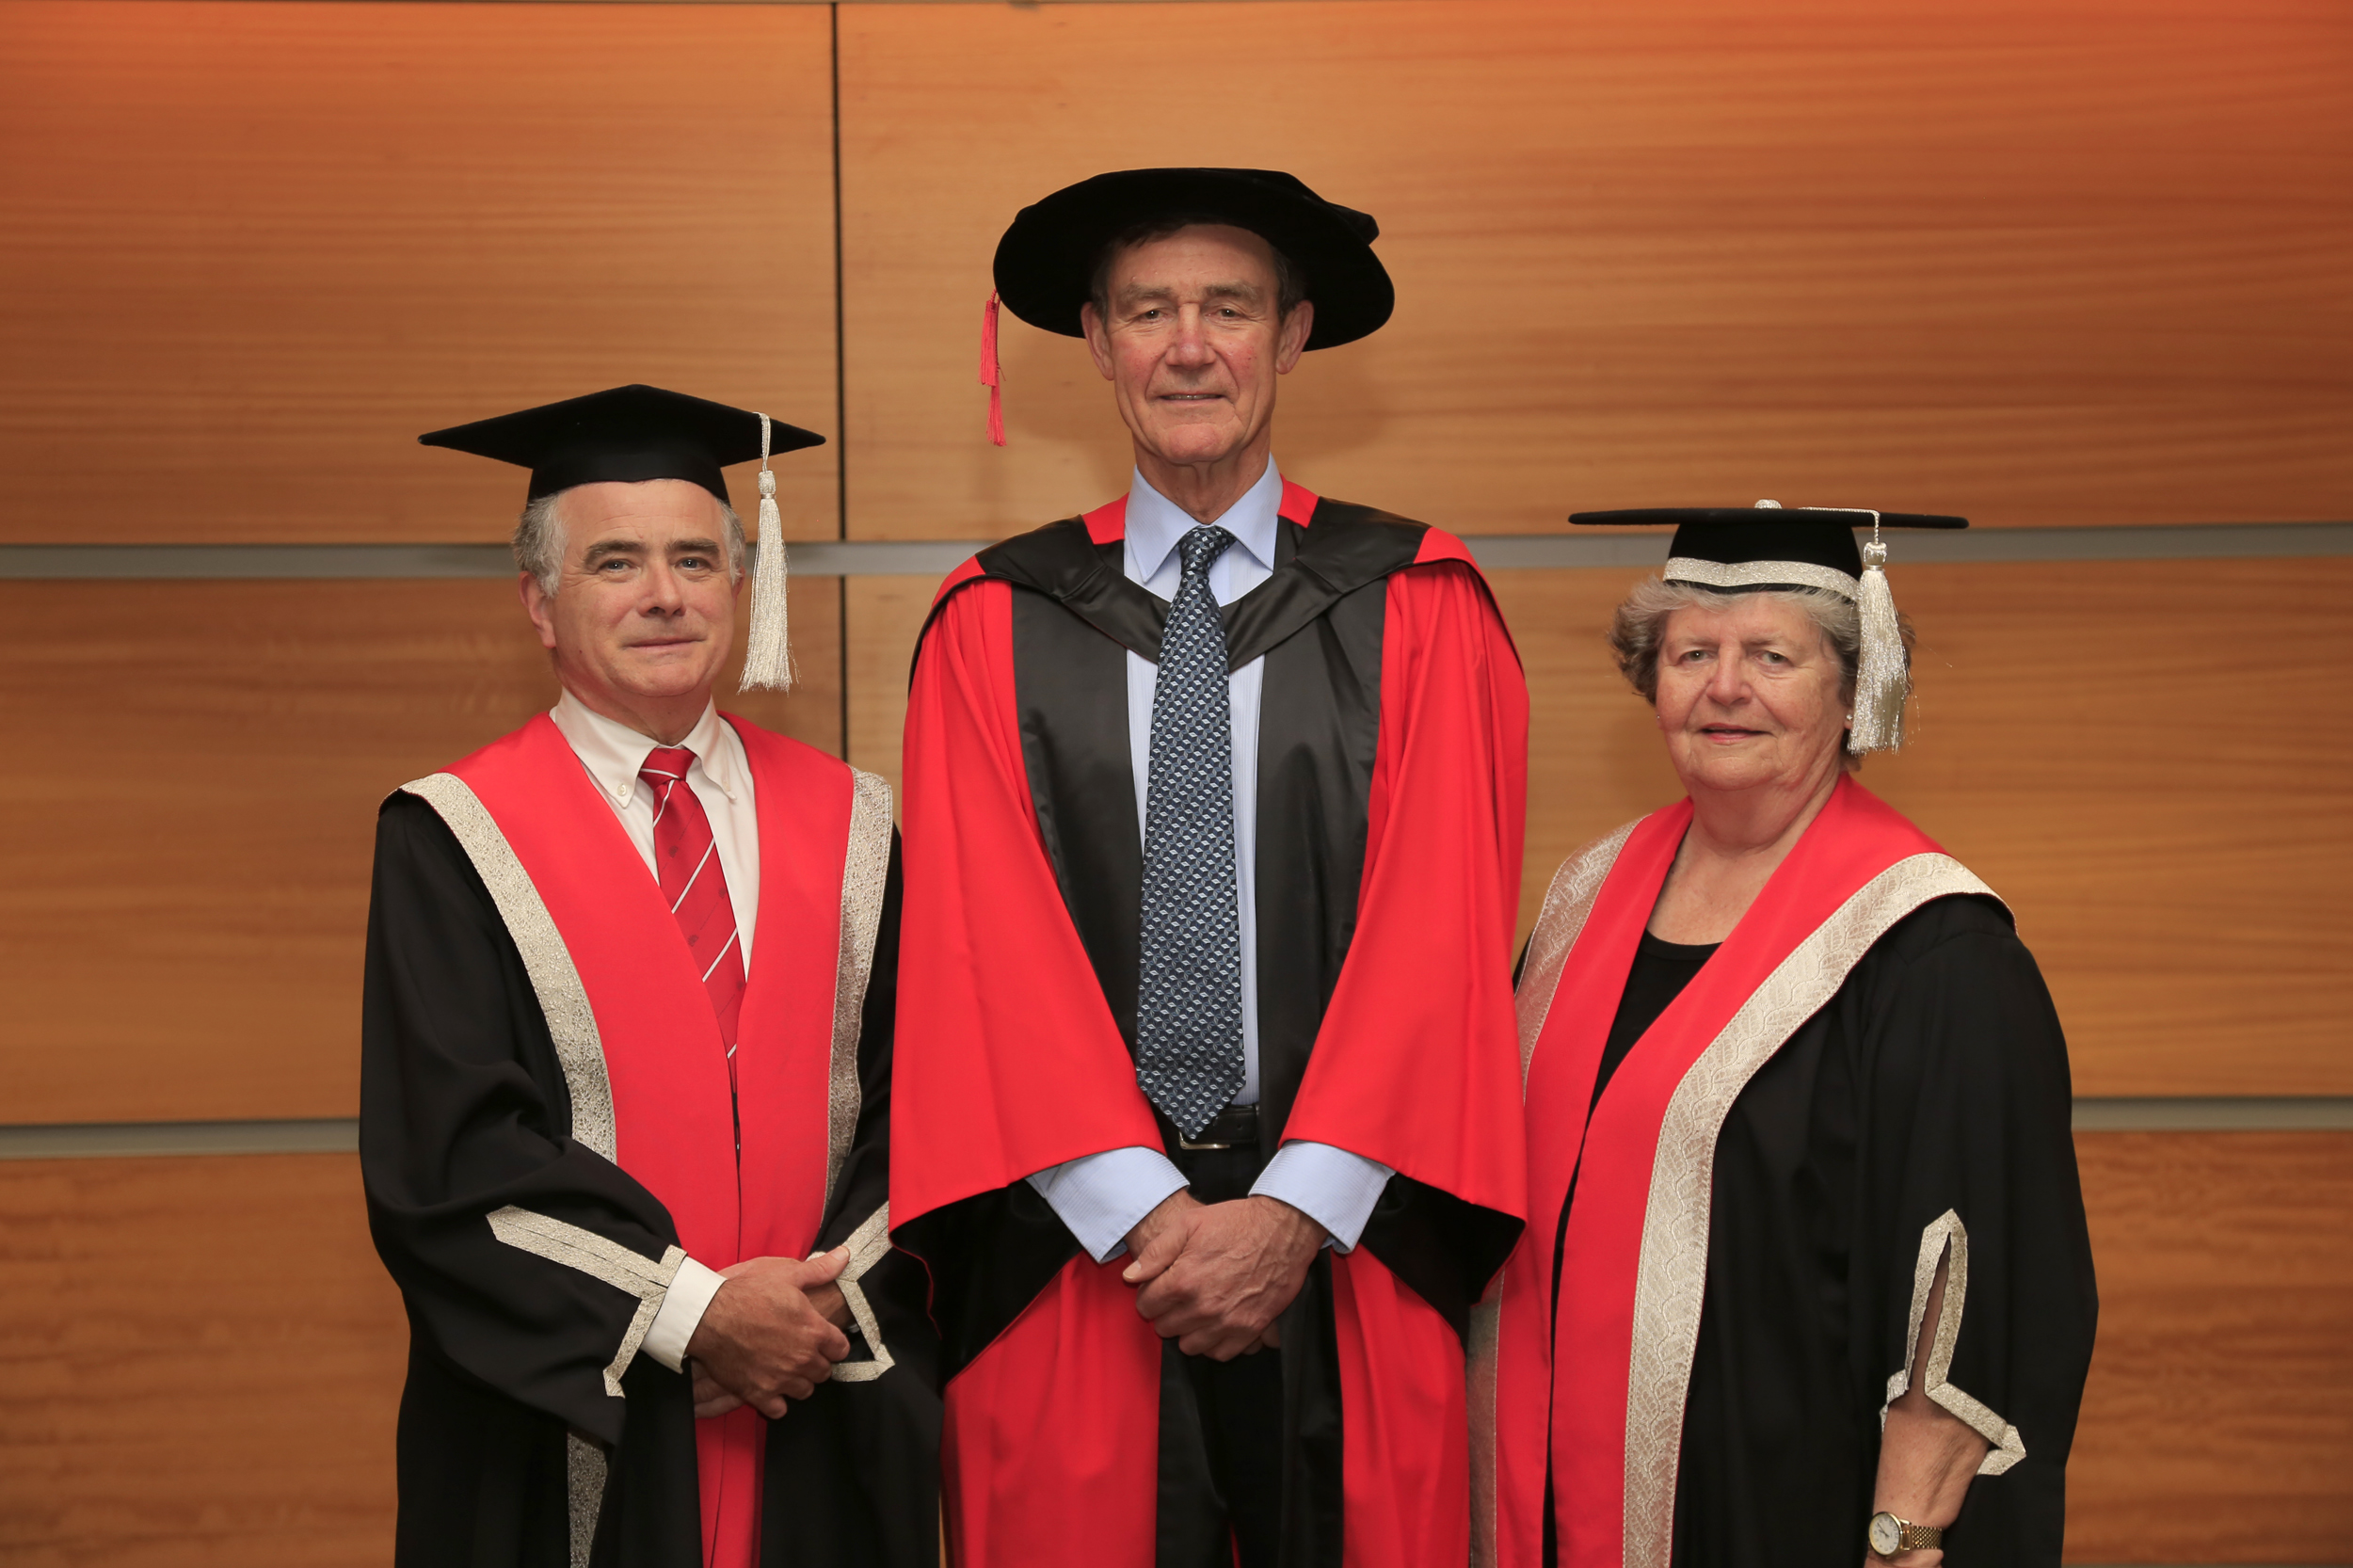 Air Chief Marshal Angus Houston AC, AFC (Ret’d), has been awarded the degree of Doctor of the University at a graduation ceremony